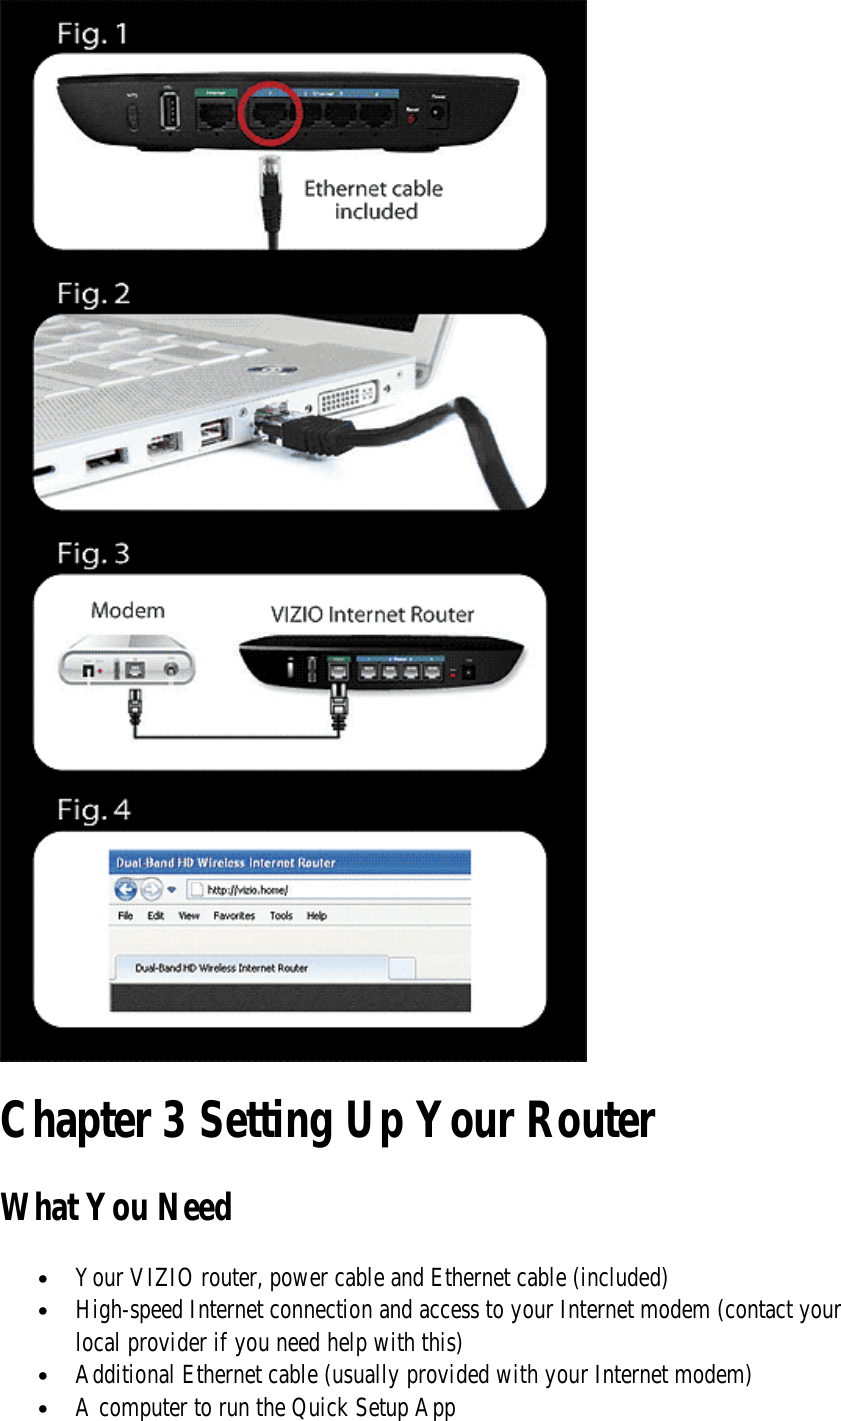  Chapter 3 Setting Up Your Router What You Need • Your VIZIO router, power cable and Ethernet cable (included) • High-speed Internet connection and access to your Internet modem (contact your local provider if you need help with this) • Additional Ethernet cable (usually provided with your Internet modem) • A computer to run the Quick Setup App 